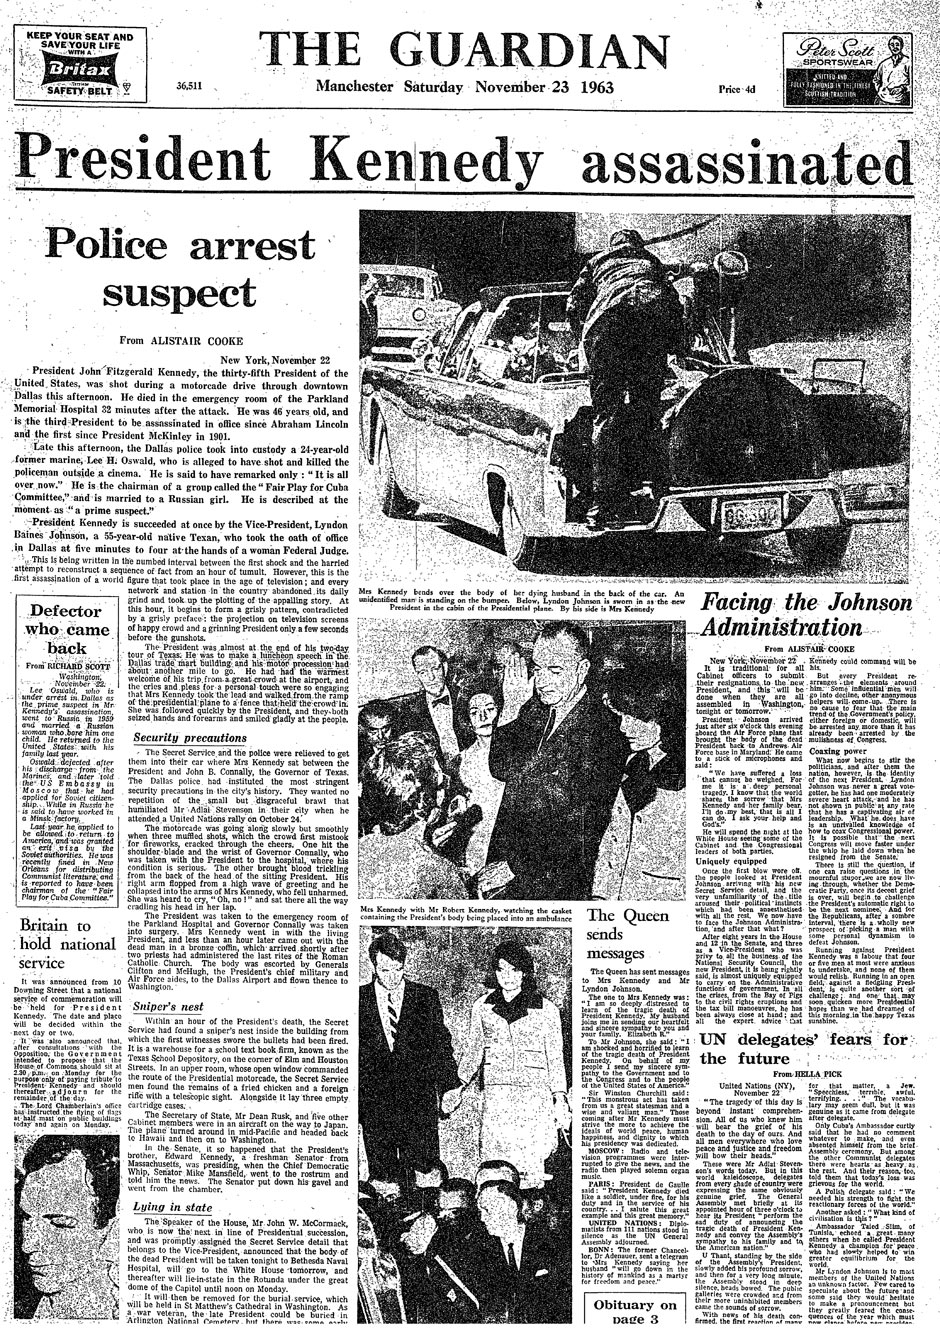 Article: the jfk assassination: why are they still lying 